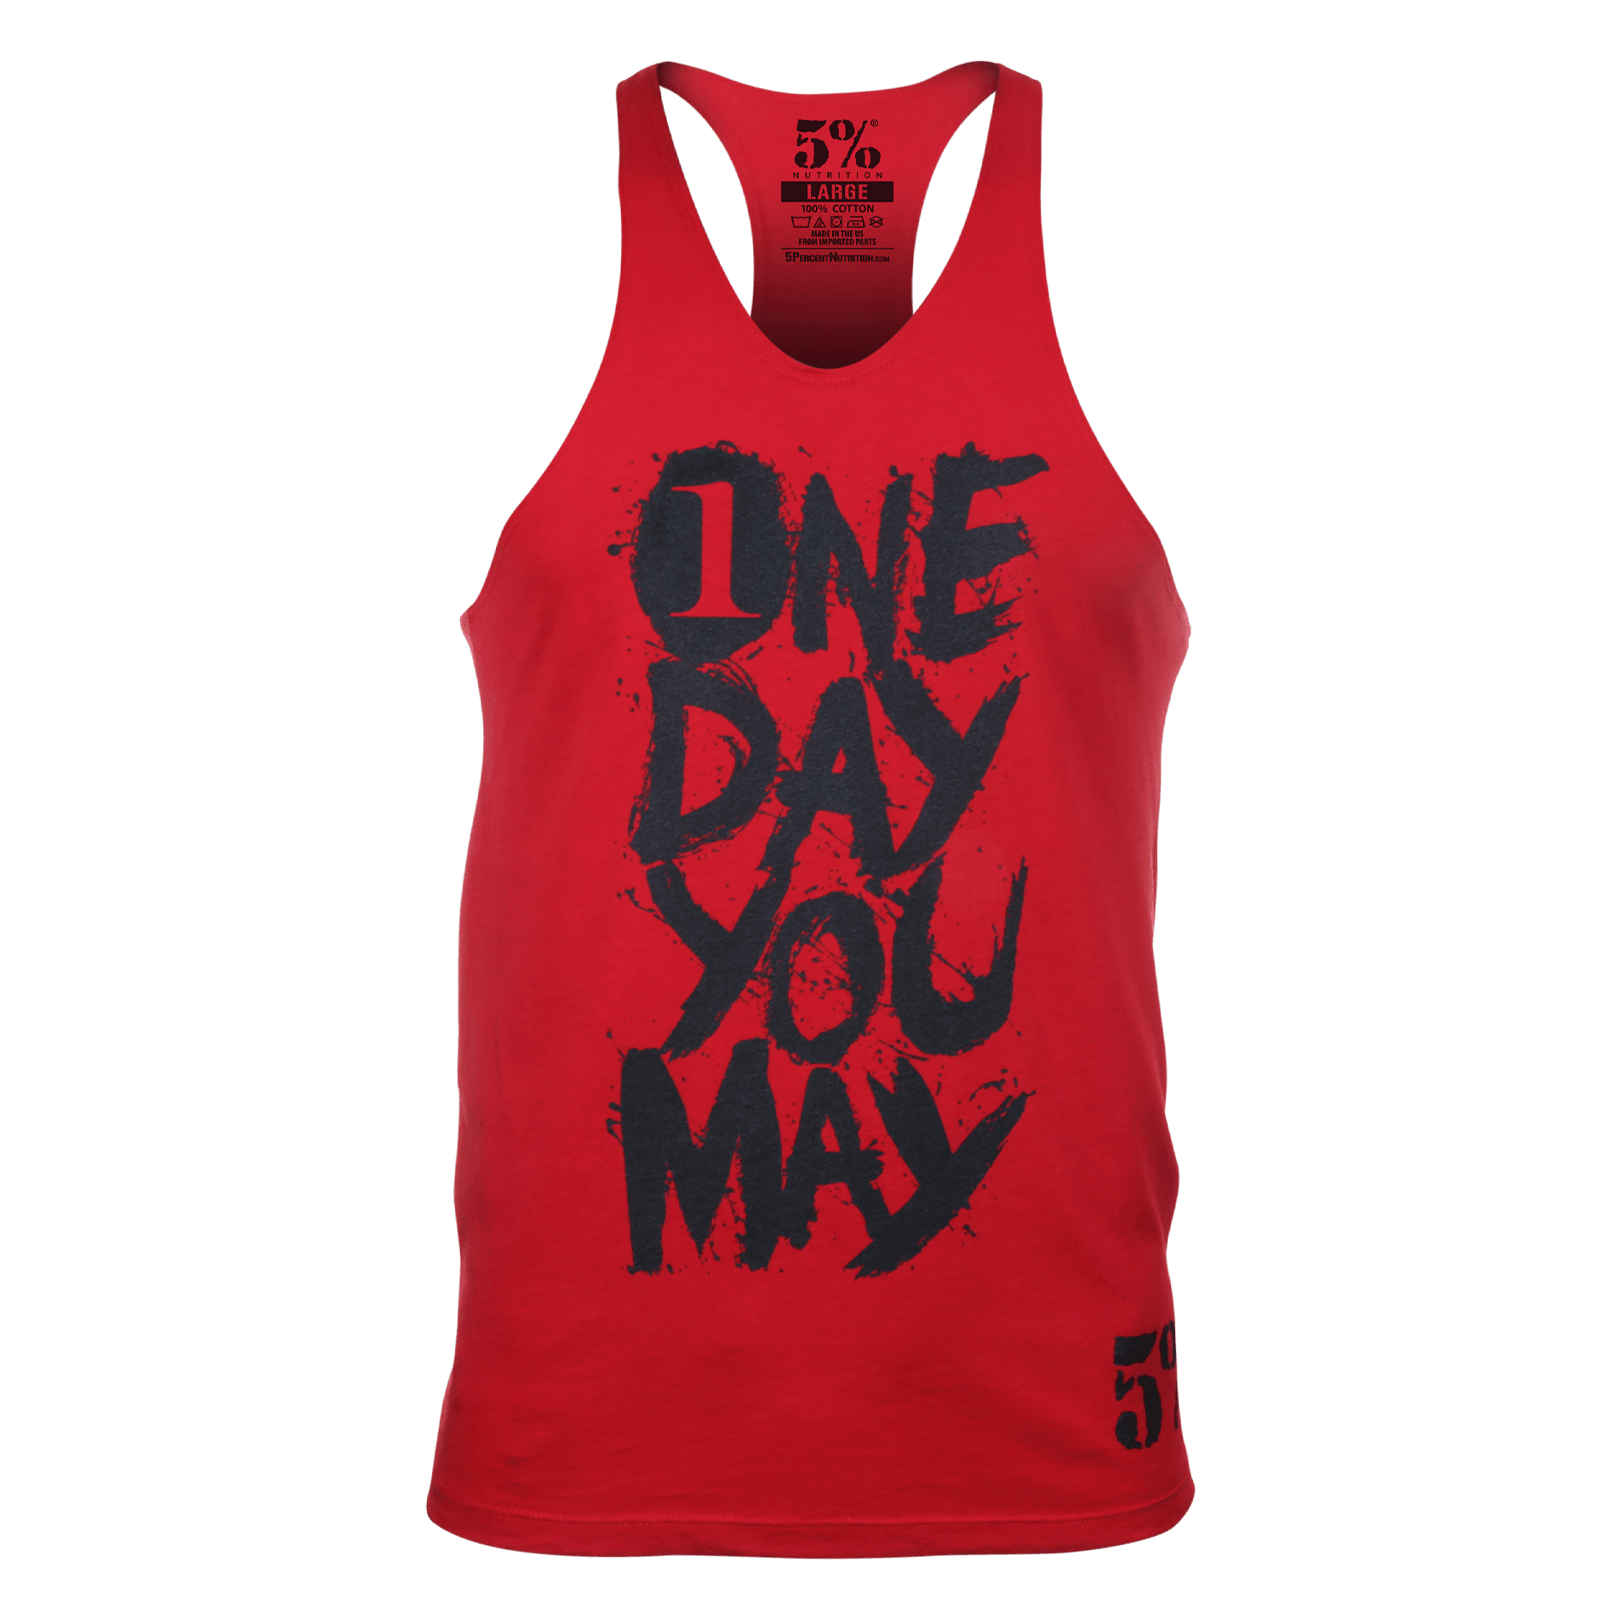 One Day You May, Red Stringer Tank with Black Lettering - 5% Nutrition